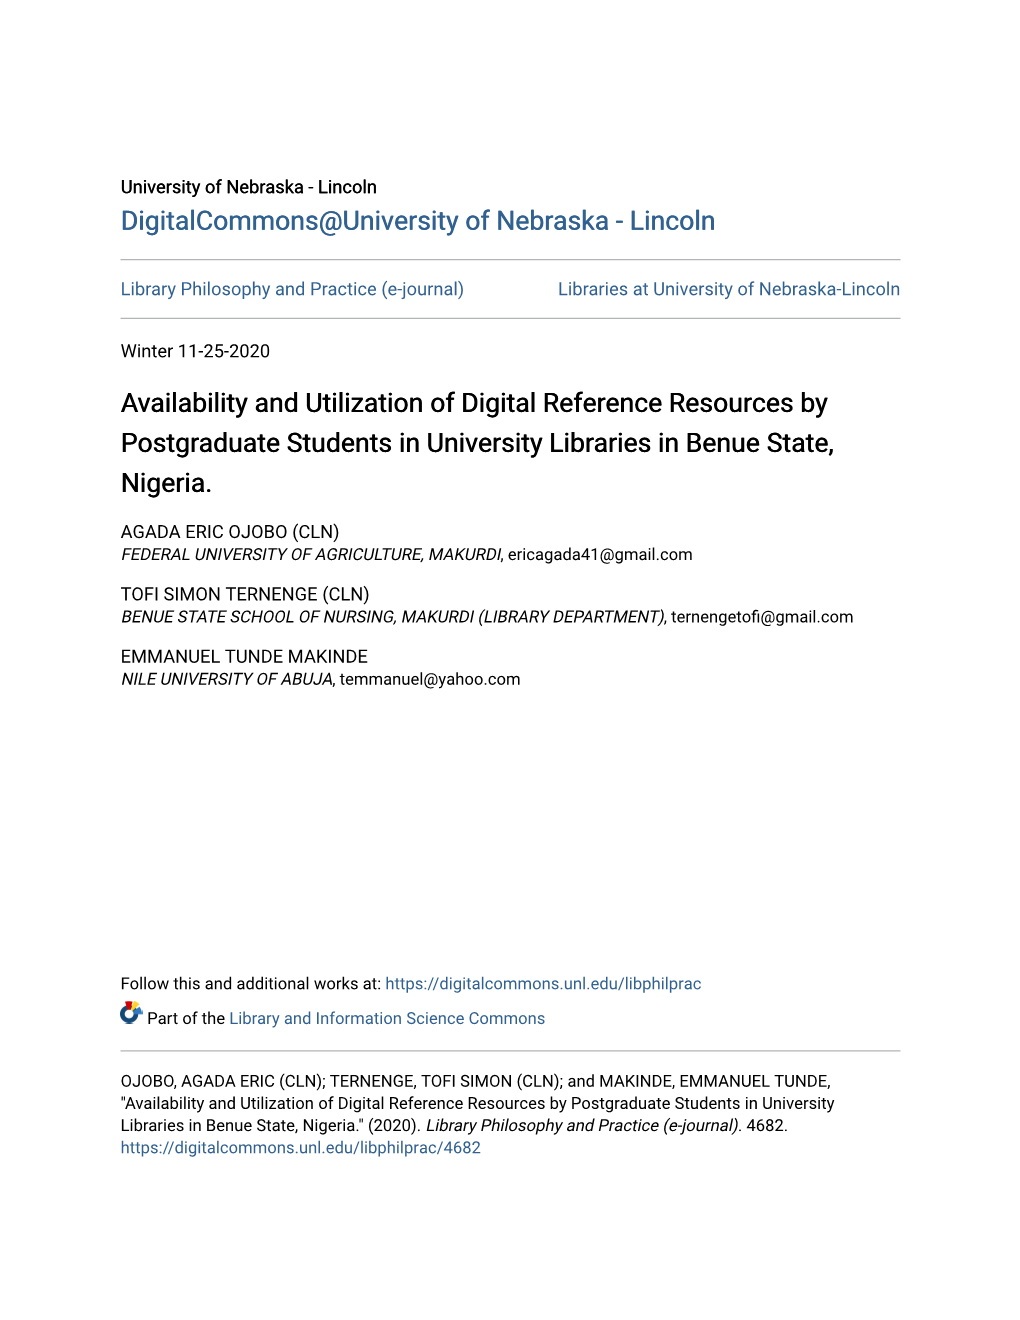 Availability and Utilization of Digital Reference Resources by Postgraduate Students in University Libraries in Benue State, Nigeria